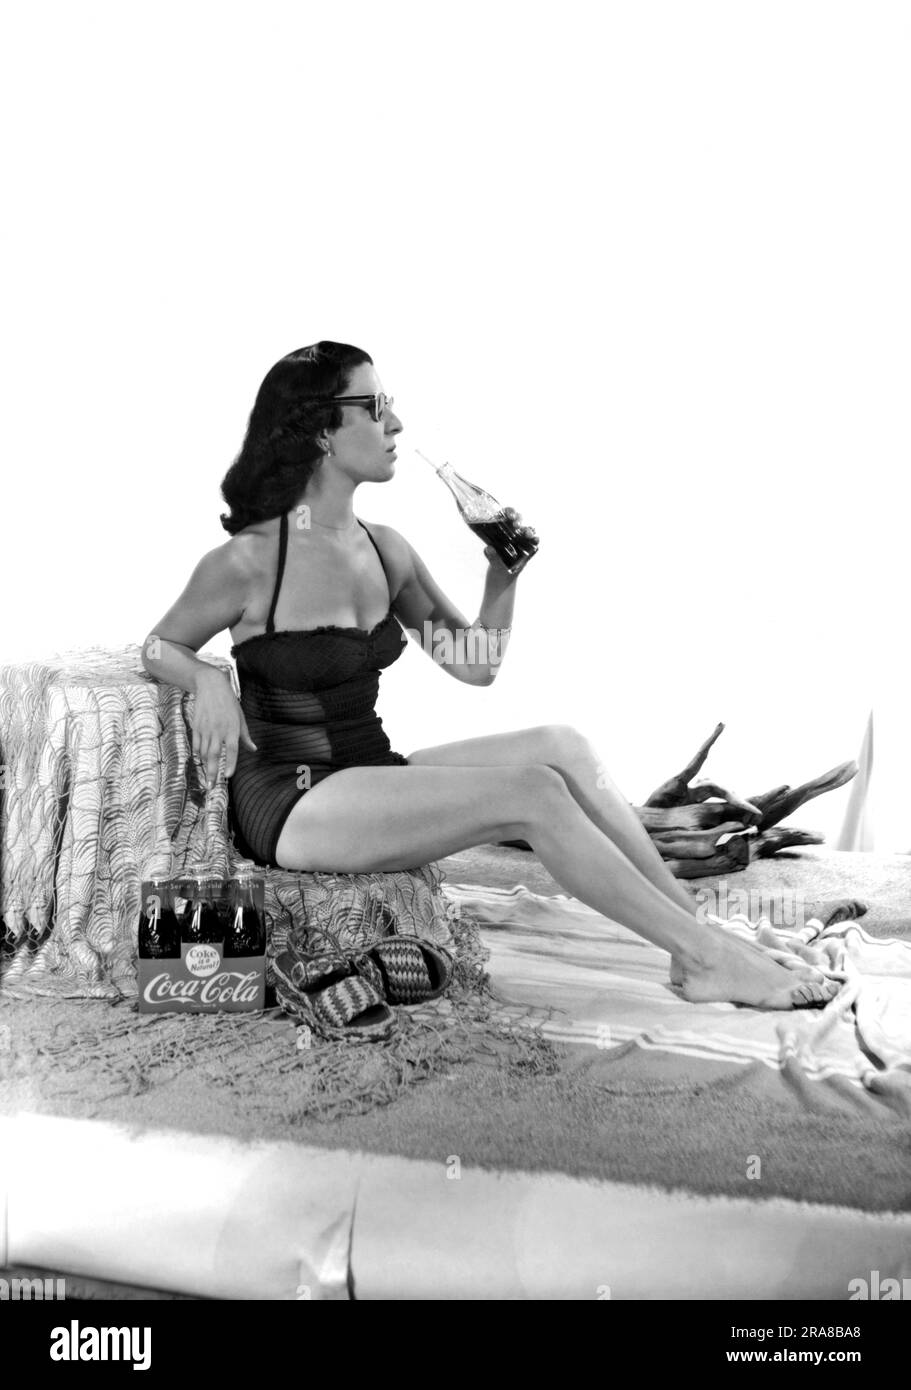 United States: c. 1947. A set for a photo shoot for a Coca Cola ad, complete with beach sand and a pretty woman in a bathing suit. Stock Photo